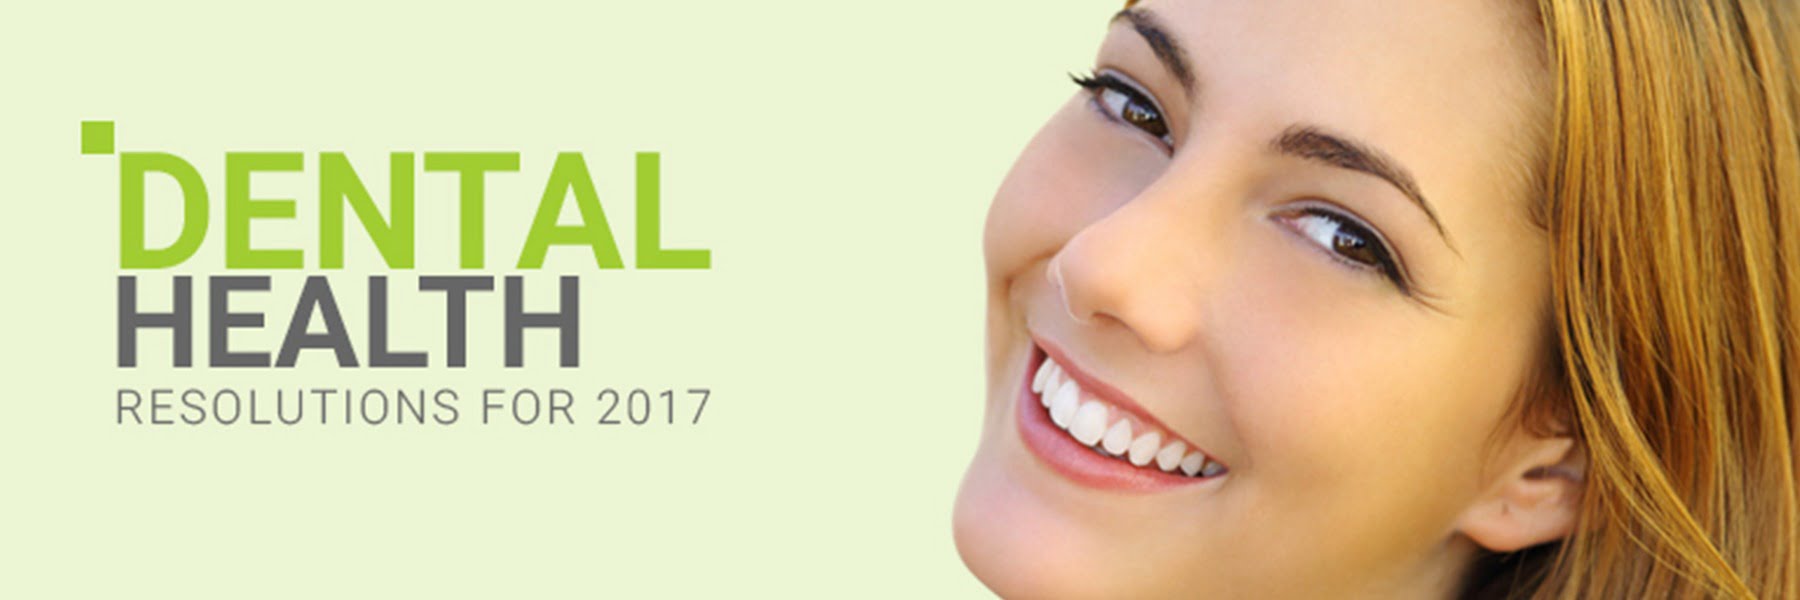 Dental Health Resolutions For 2017